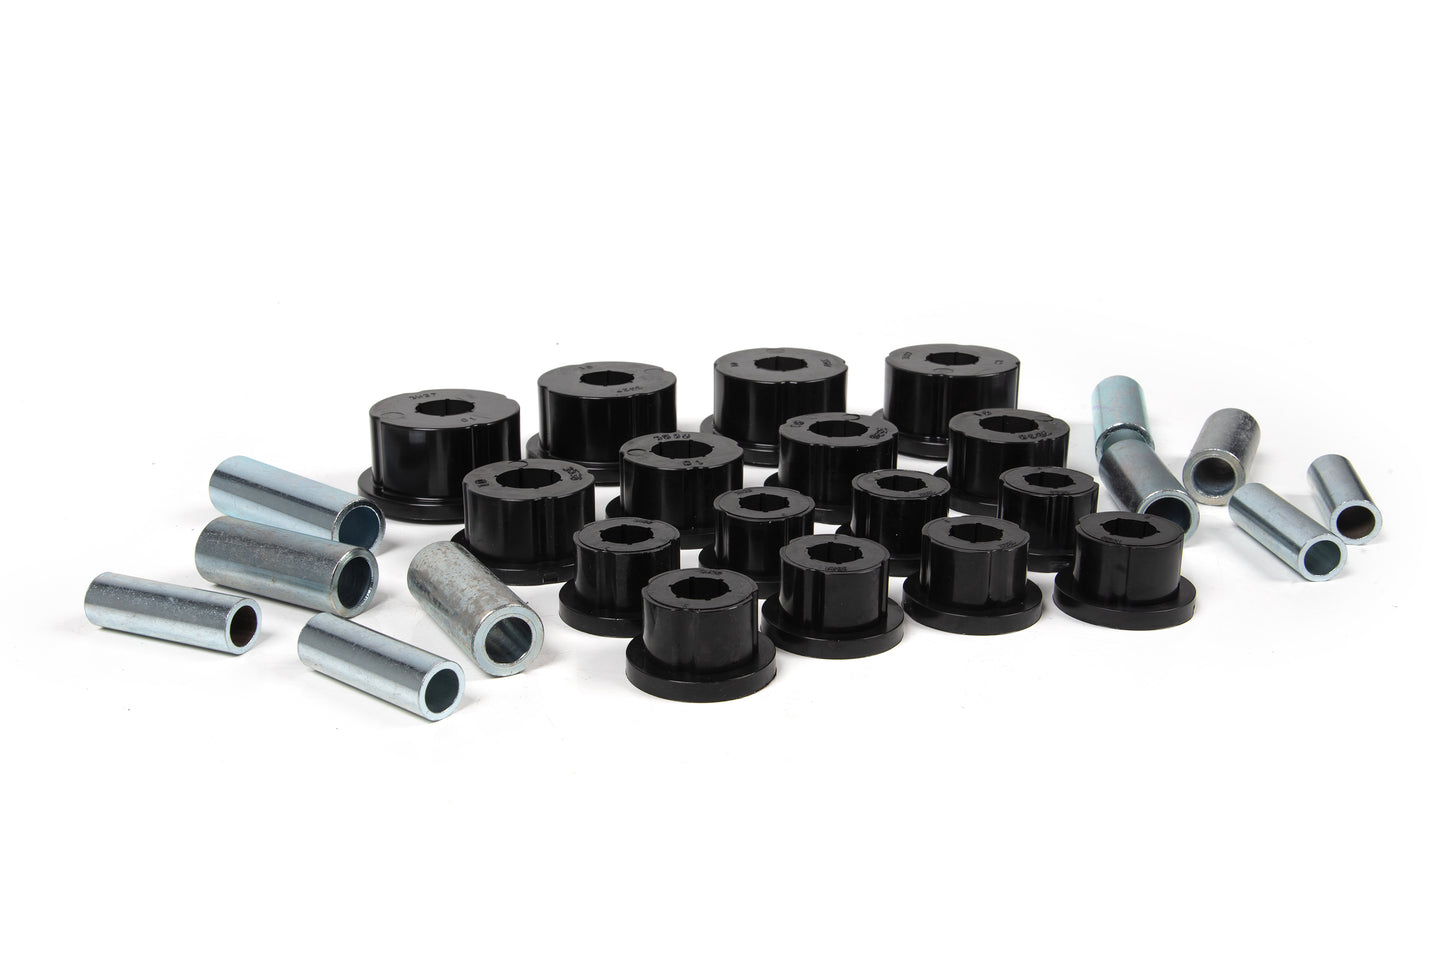 Bushing And Sleeve Kit - Long Arm Control Arms - Dodge Ram 2500 / 3500 4WD (03-13) - Off-Road Express